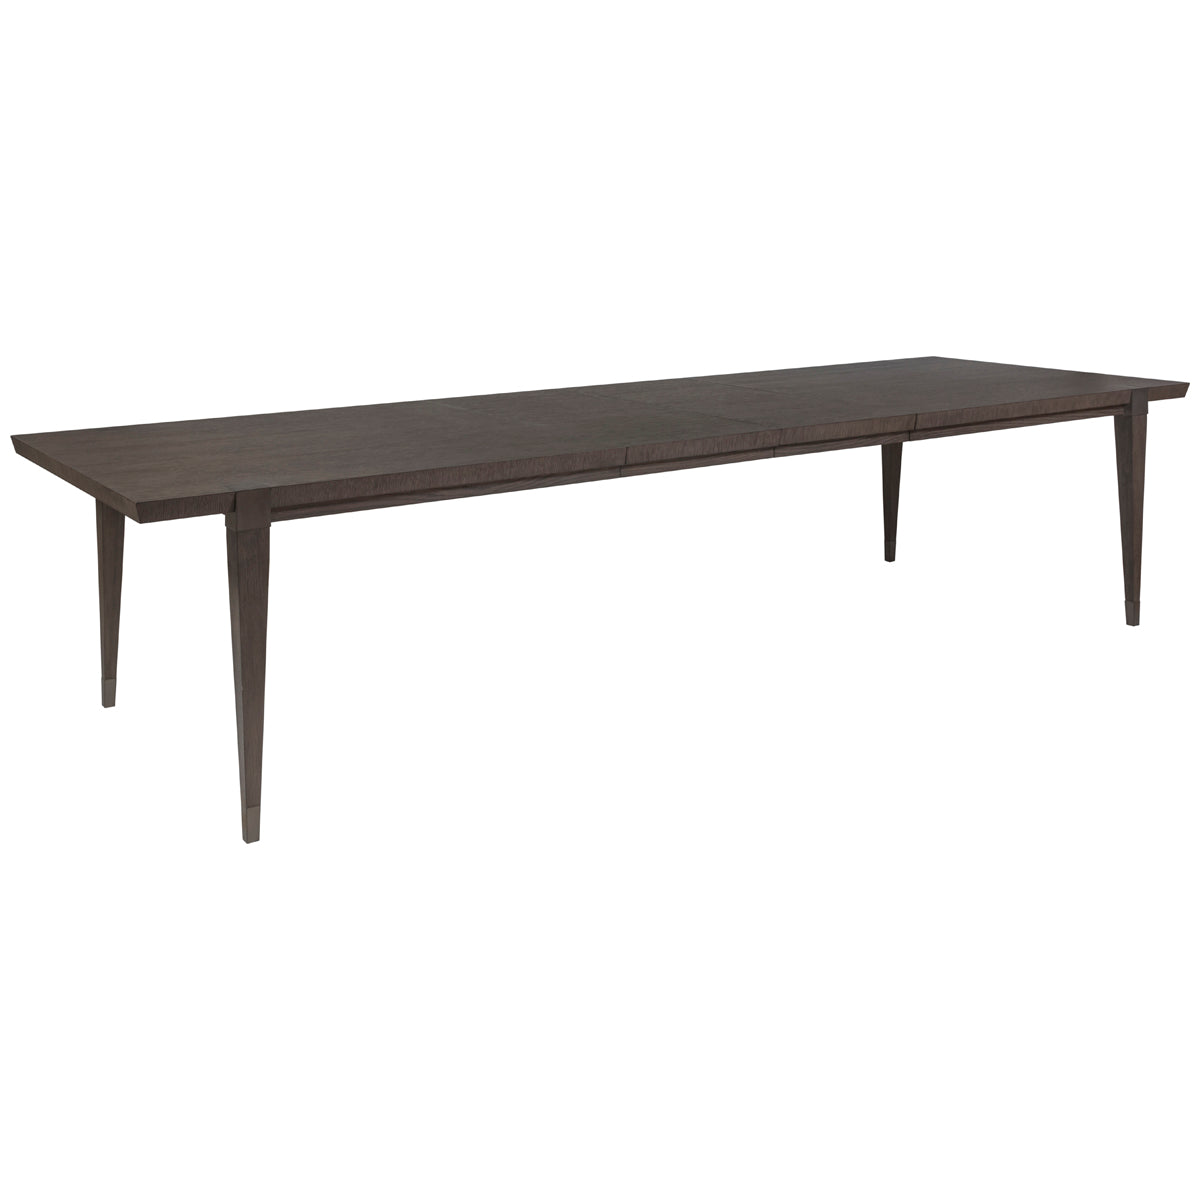 Artistica Home Signature Designs Belevedere Dining Table 2295-877